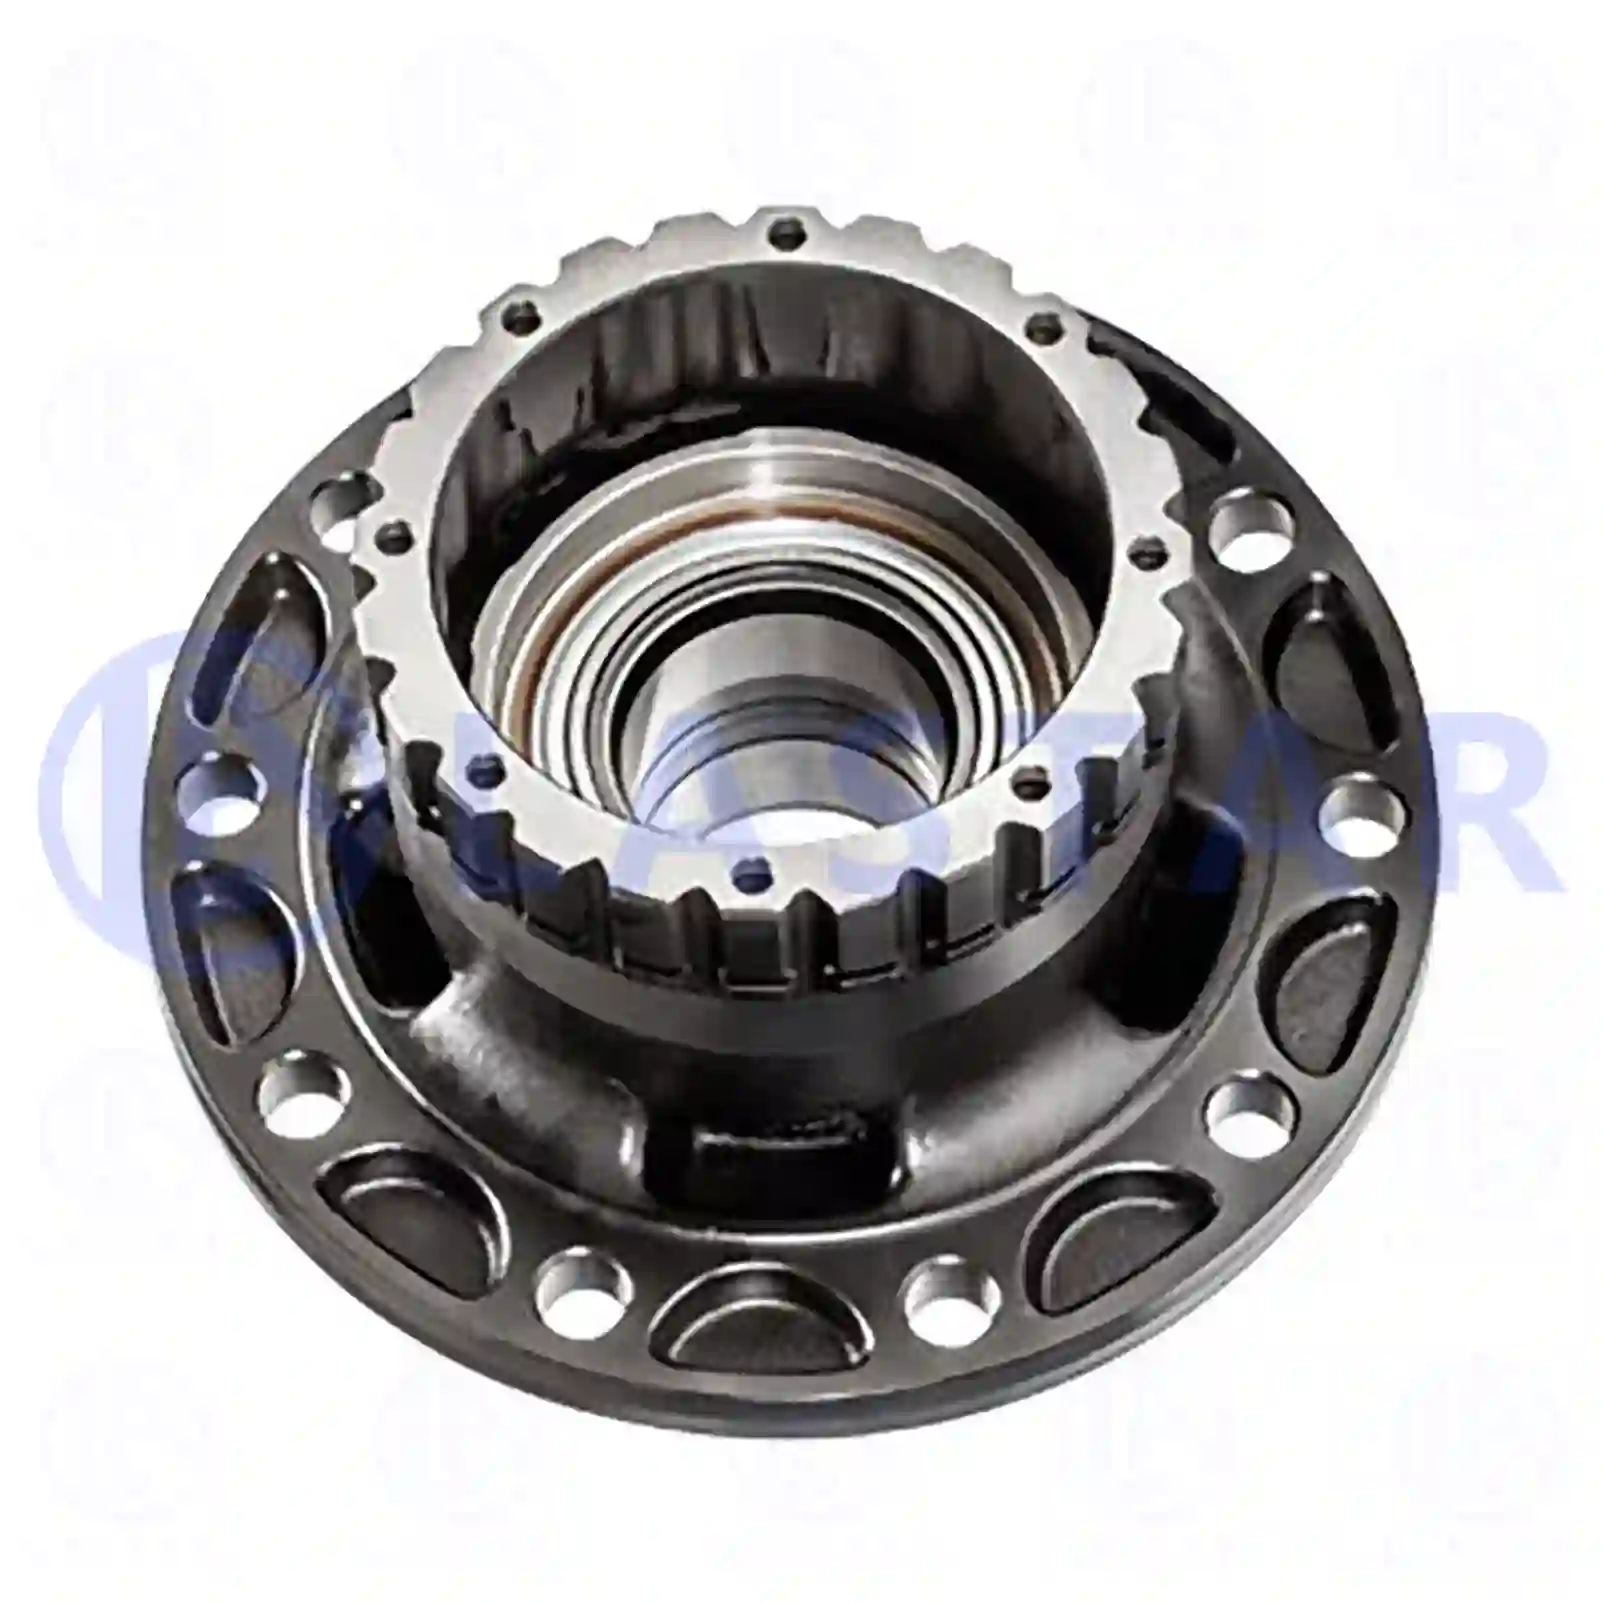 Wheel hub, with bearing, without ABS ring, 77726603, 7420535263S, 7420535264, 7485107753S, 20535263S, 20567394S1, 85107753S, ZG30219-0008, , ||  77726603 Lastar Spare Part | Truck Spare Parts, Auotomotive Spare Parts Wheel hub, with bearing, without ABS ring, 77726603, 7420535263S, 7420535264, 7485107753S, 20535263S, 20567394S1, 85107753S, ZG30219-0008, , ||  77726603 Lastar Spare Part | Truck Spare Parts, Auotomotive Spare Parts